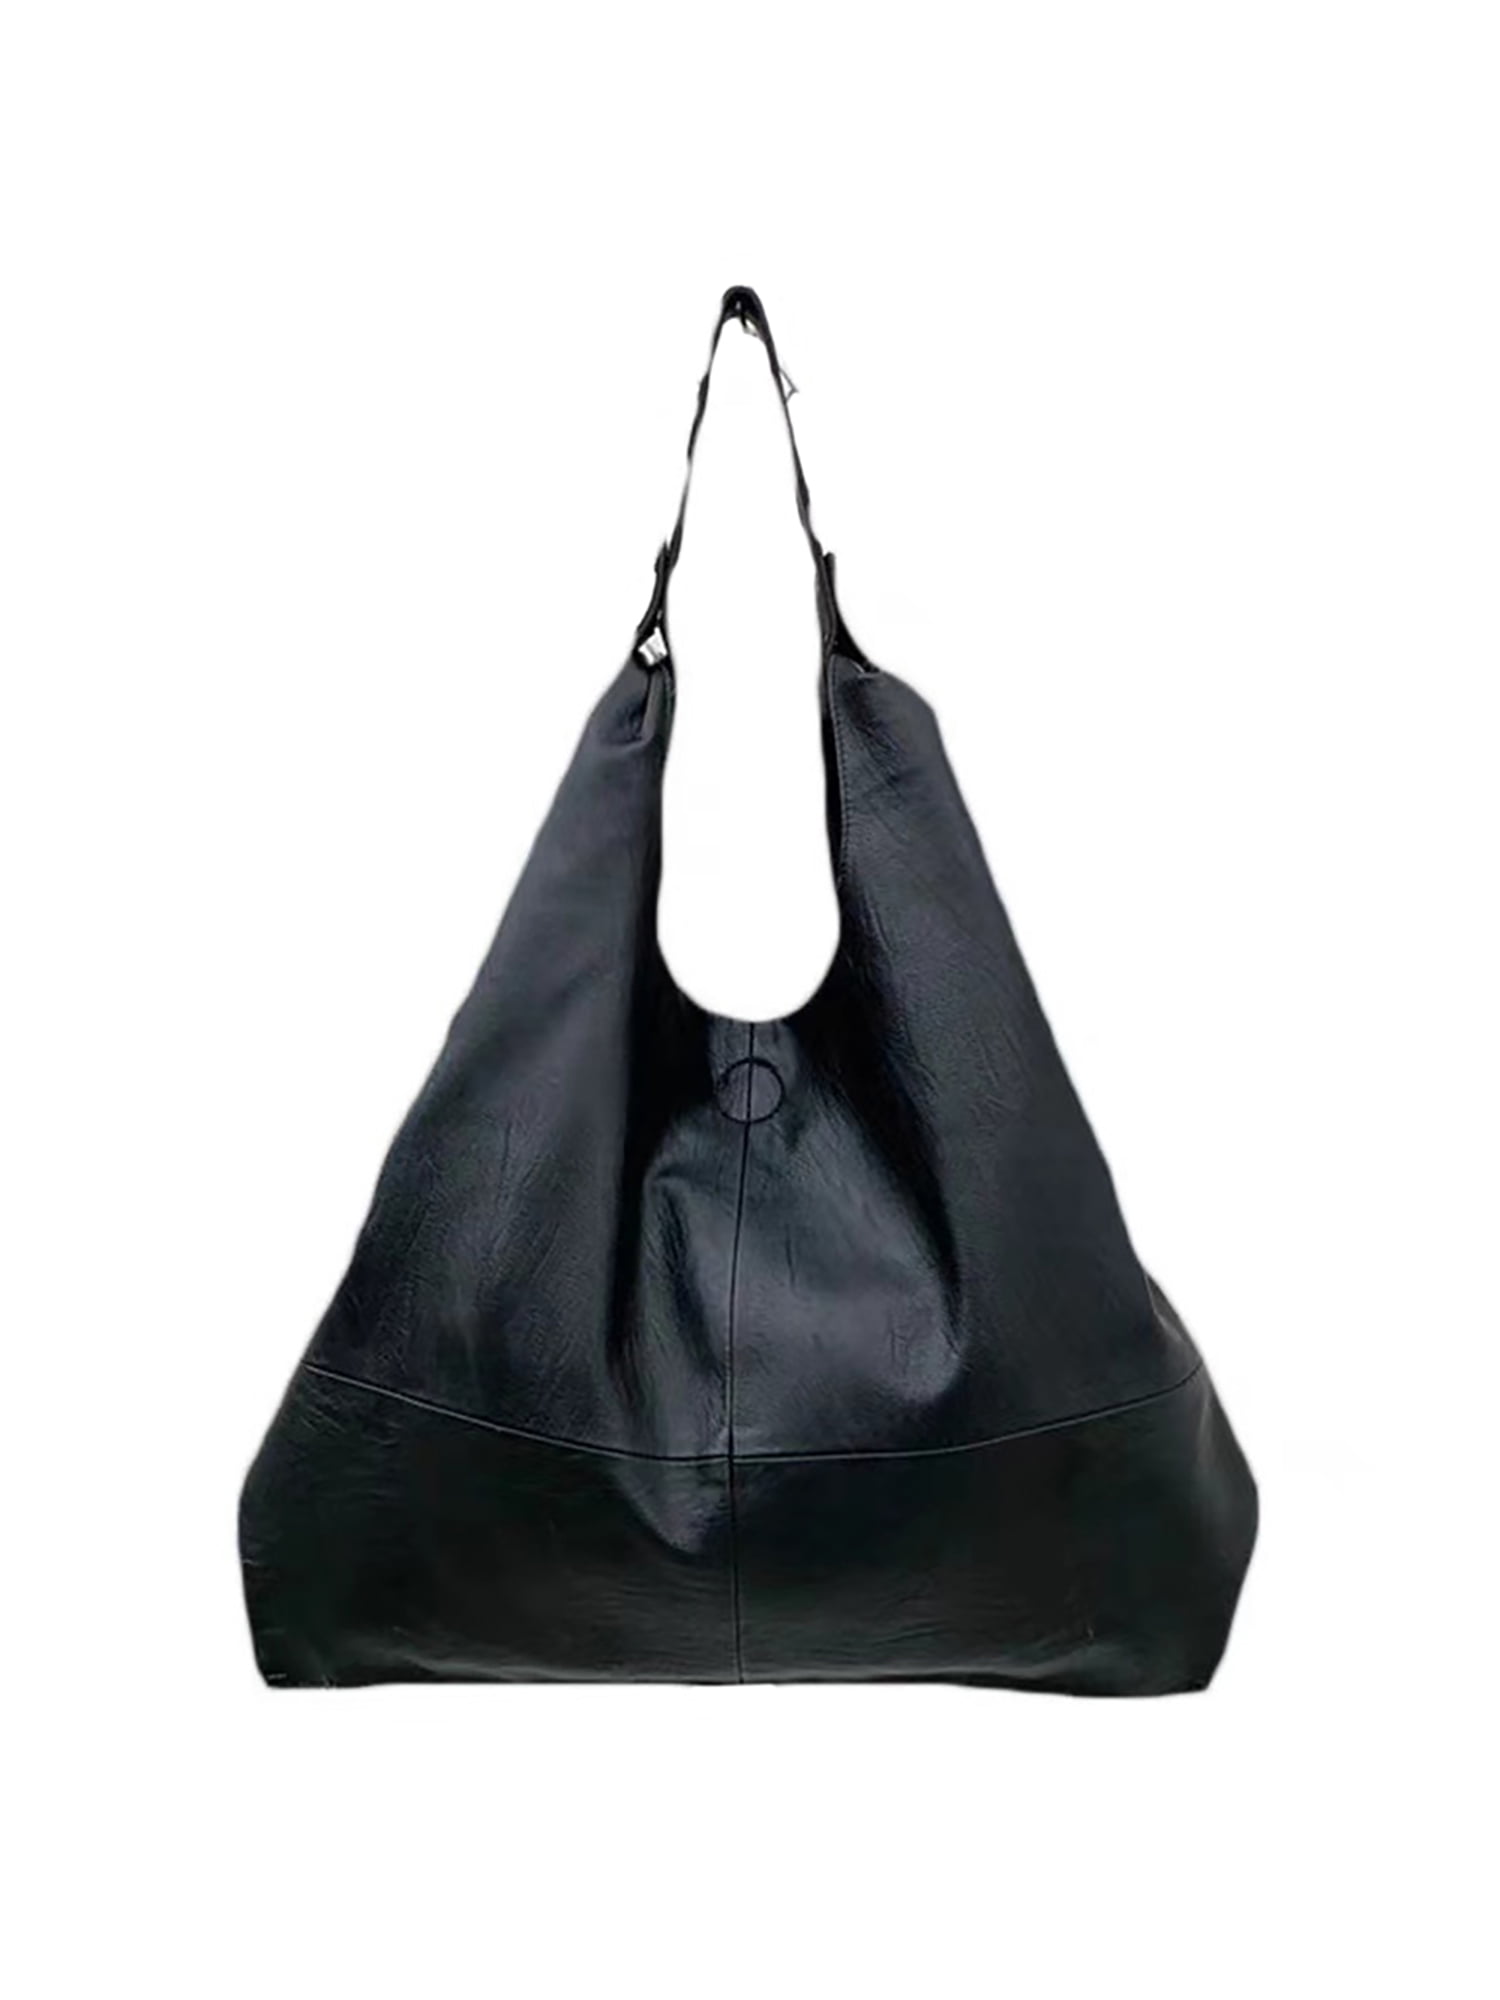 Extra Large Black Leather Tote Bag Oversized Work and Travel 